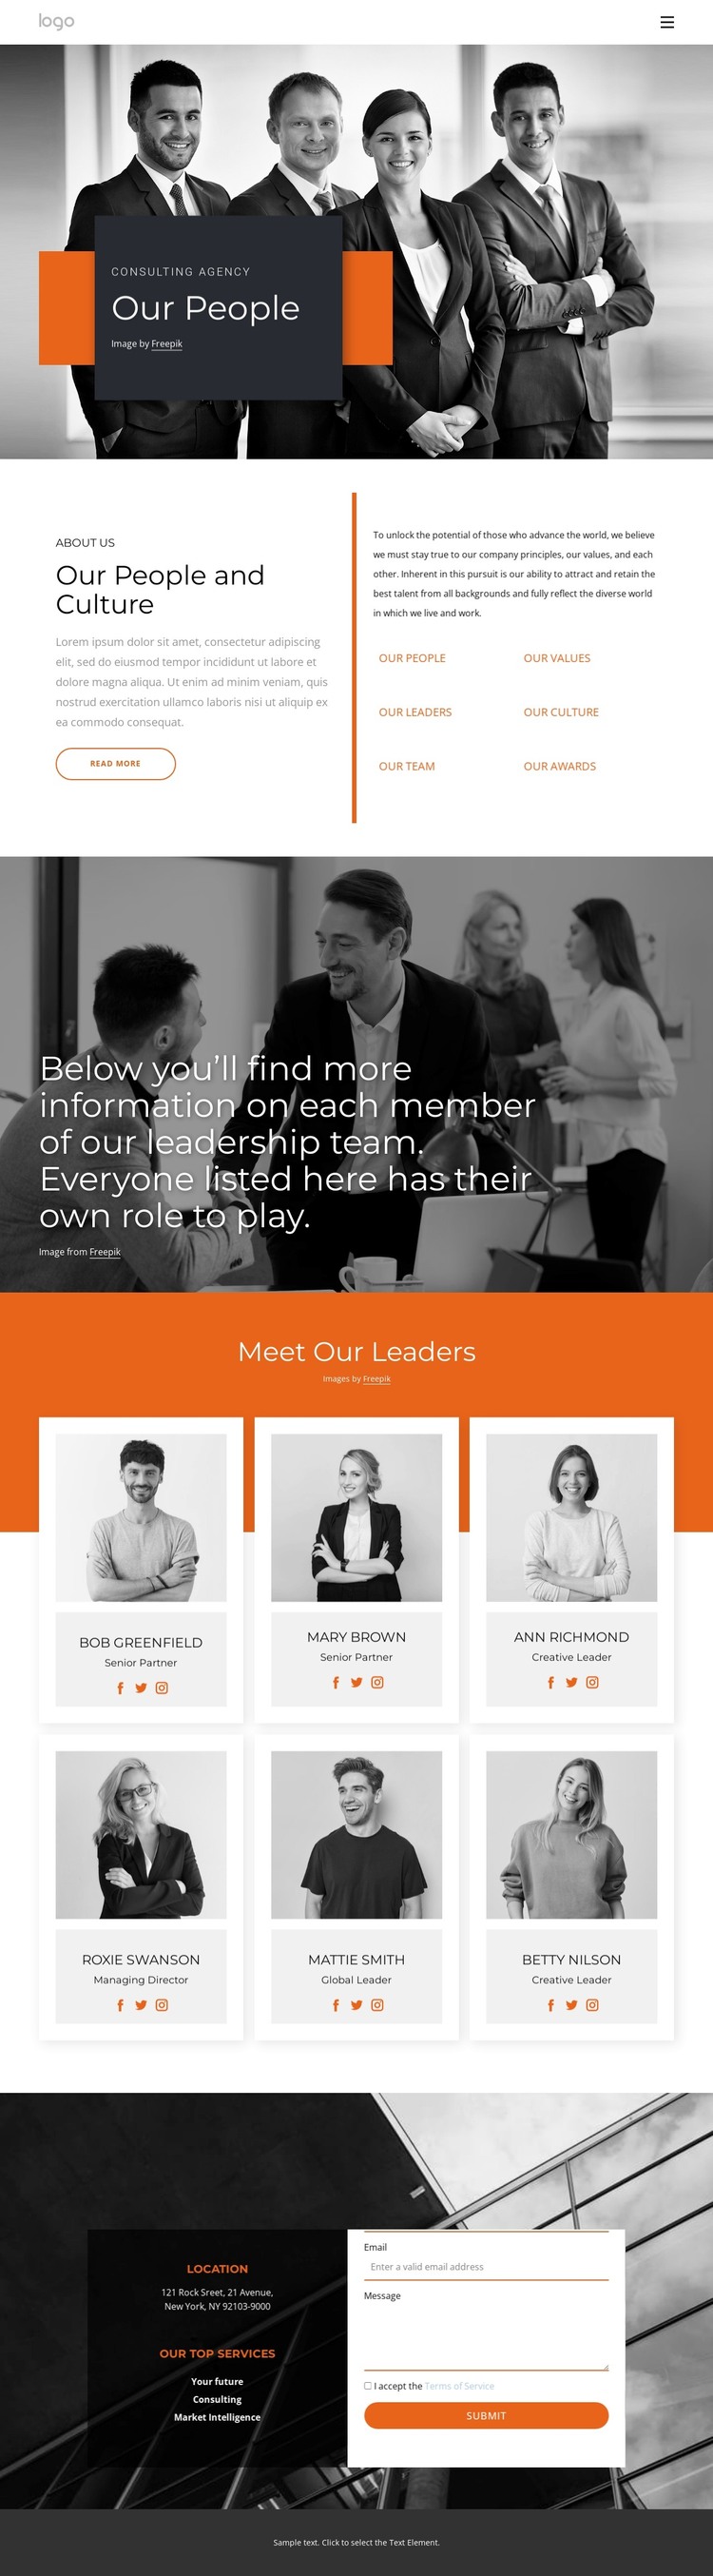 Our people and our culture WordPress Theme